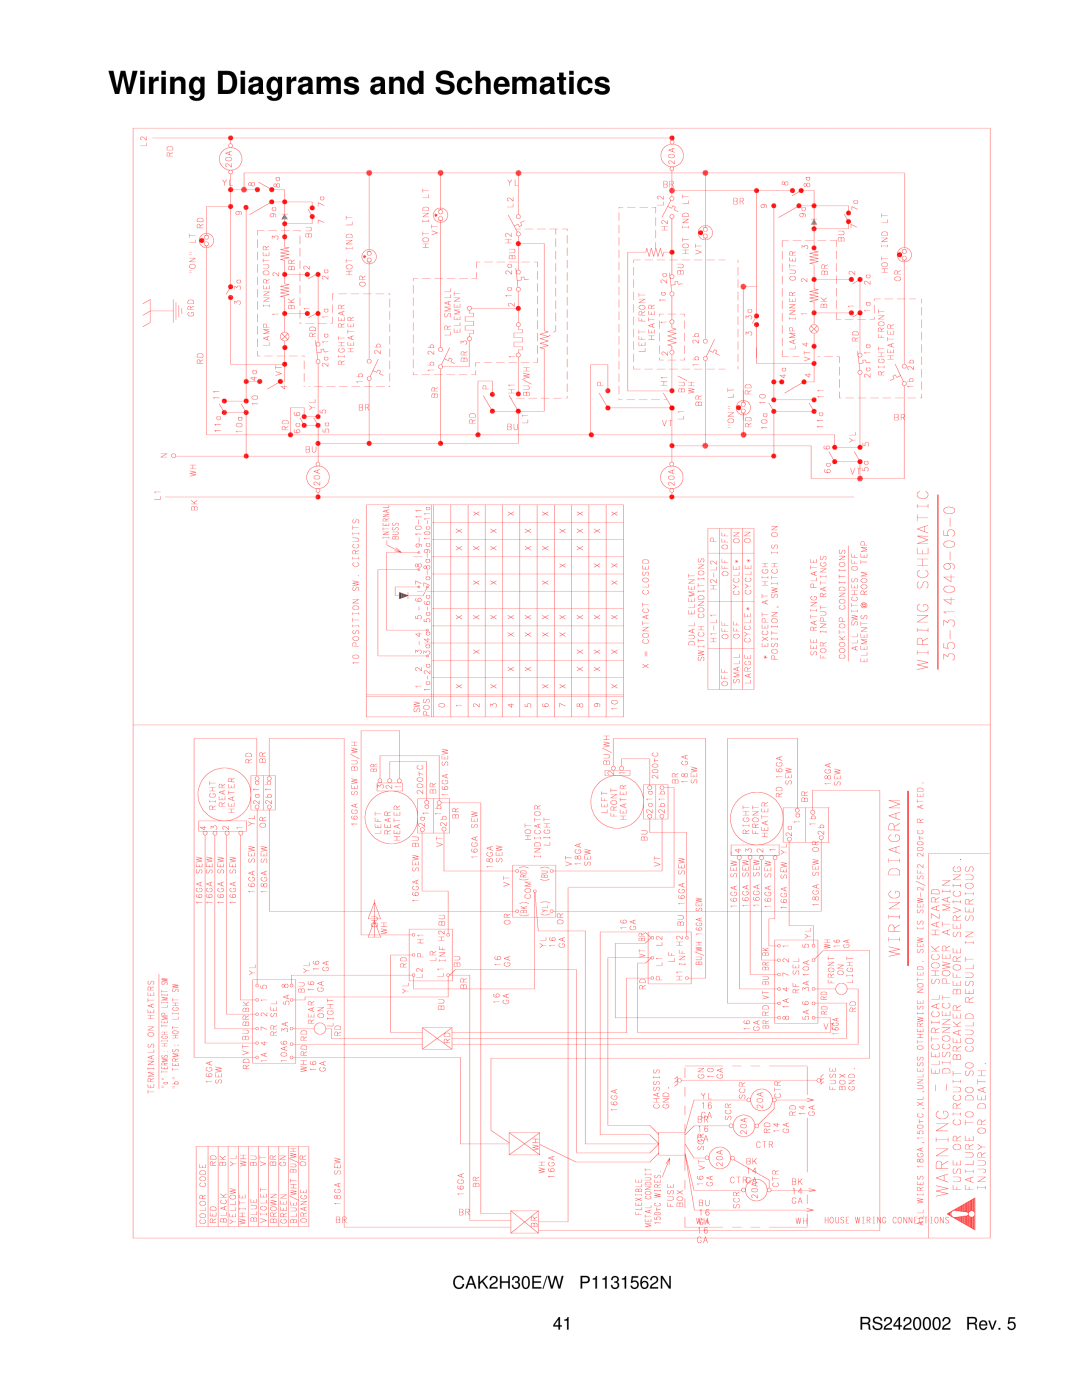 Amana AK2H30, AK2H36E2, AK2HW2, AK2T30/36E1/W1 Wiring Diagrams and Schematics, CAK2H30E/W P1131562N, RS2420002 Rev 